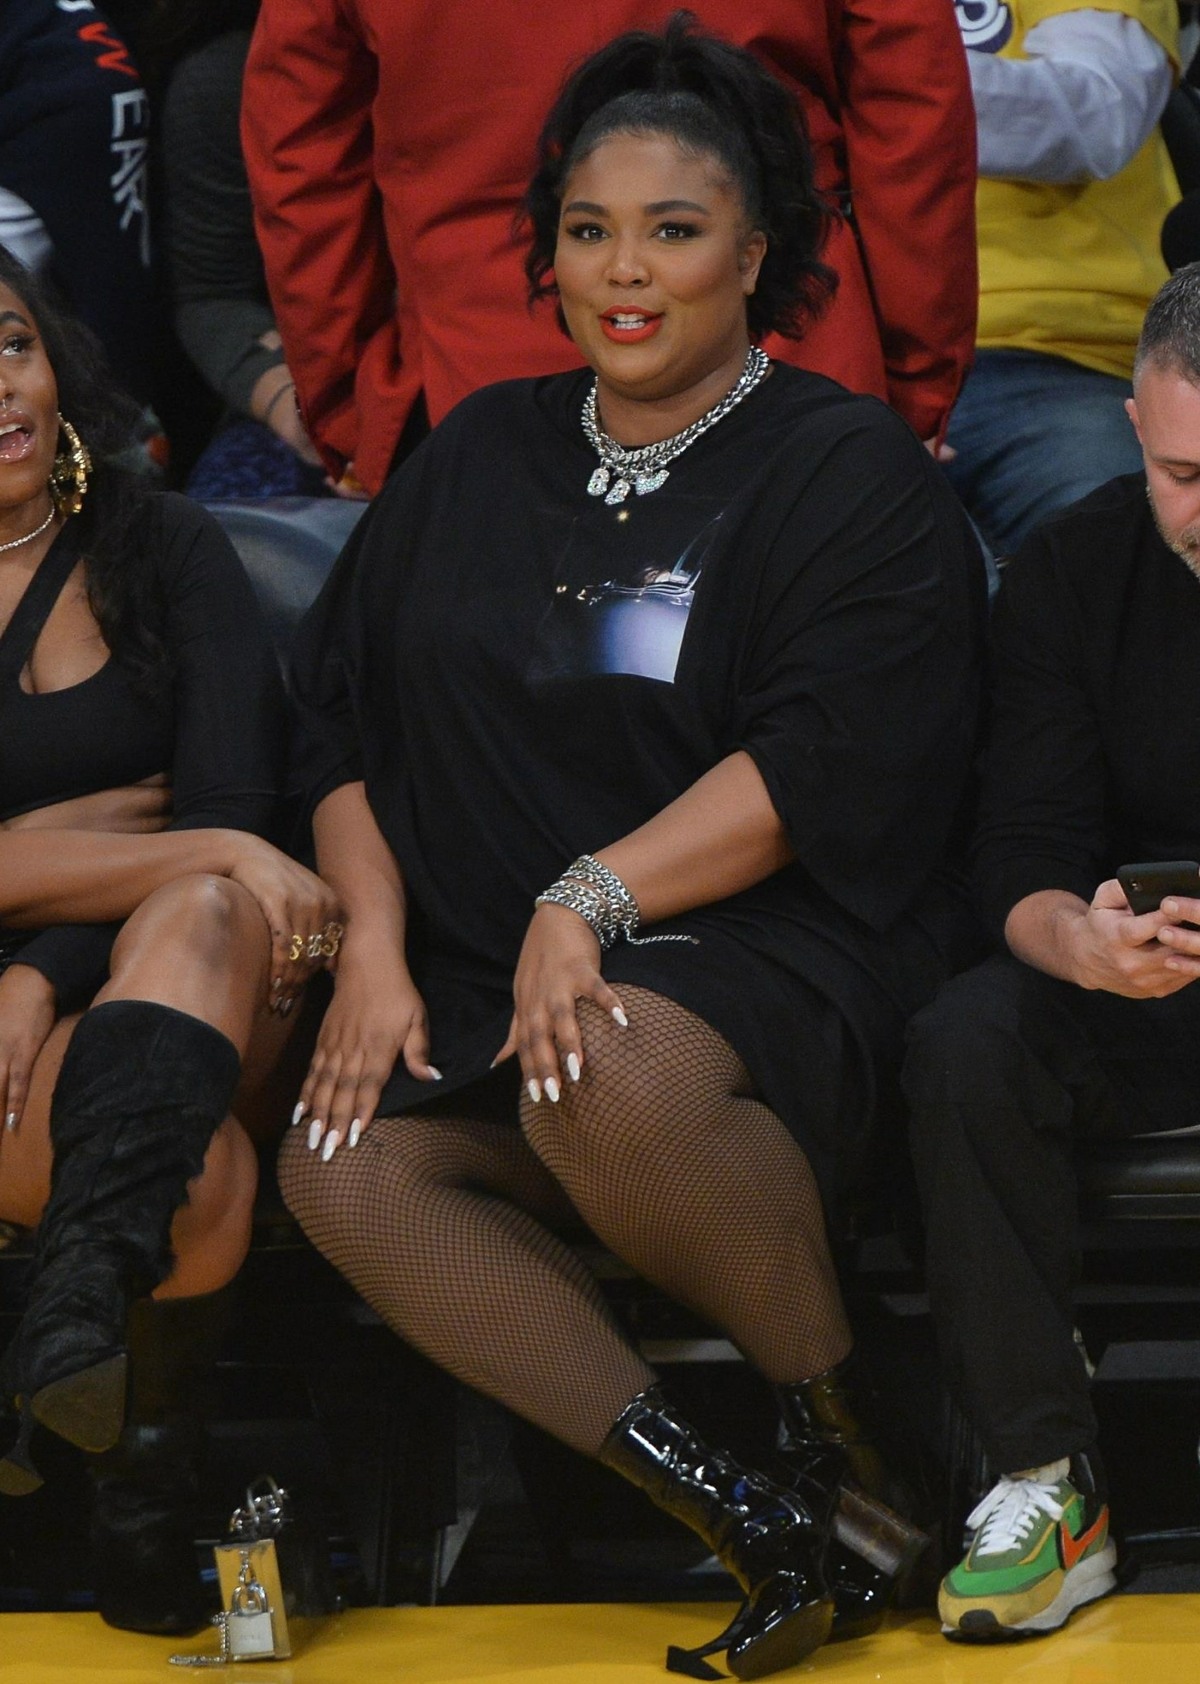 The many faces of Lizzo at the Lakers game!